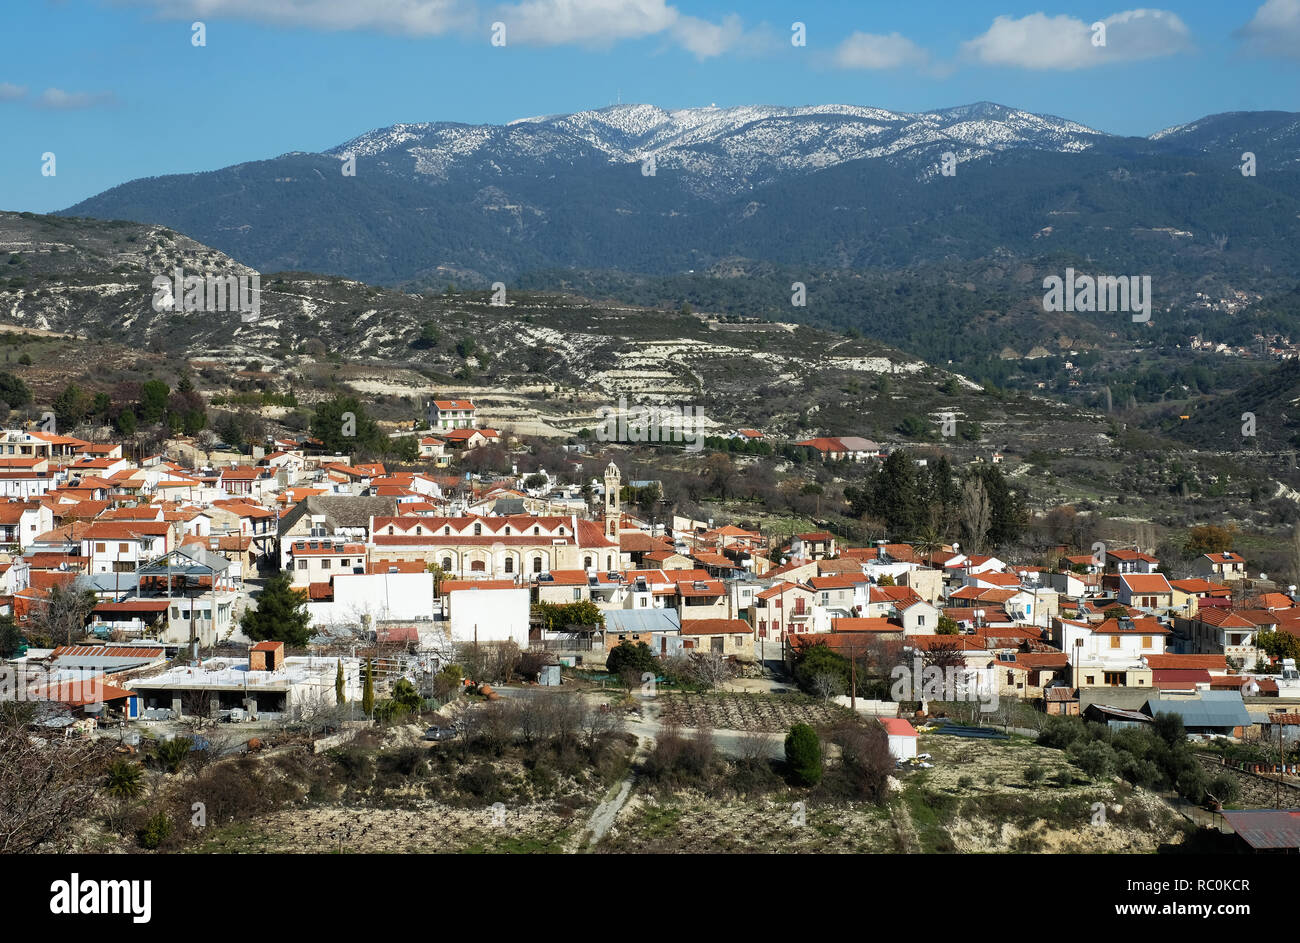 A view of the village of Omodos and the snow capped Mount Olympus in the Troodos Mountains, Cyprus. Stock Photo